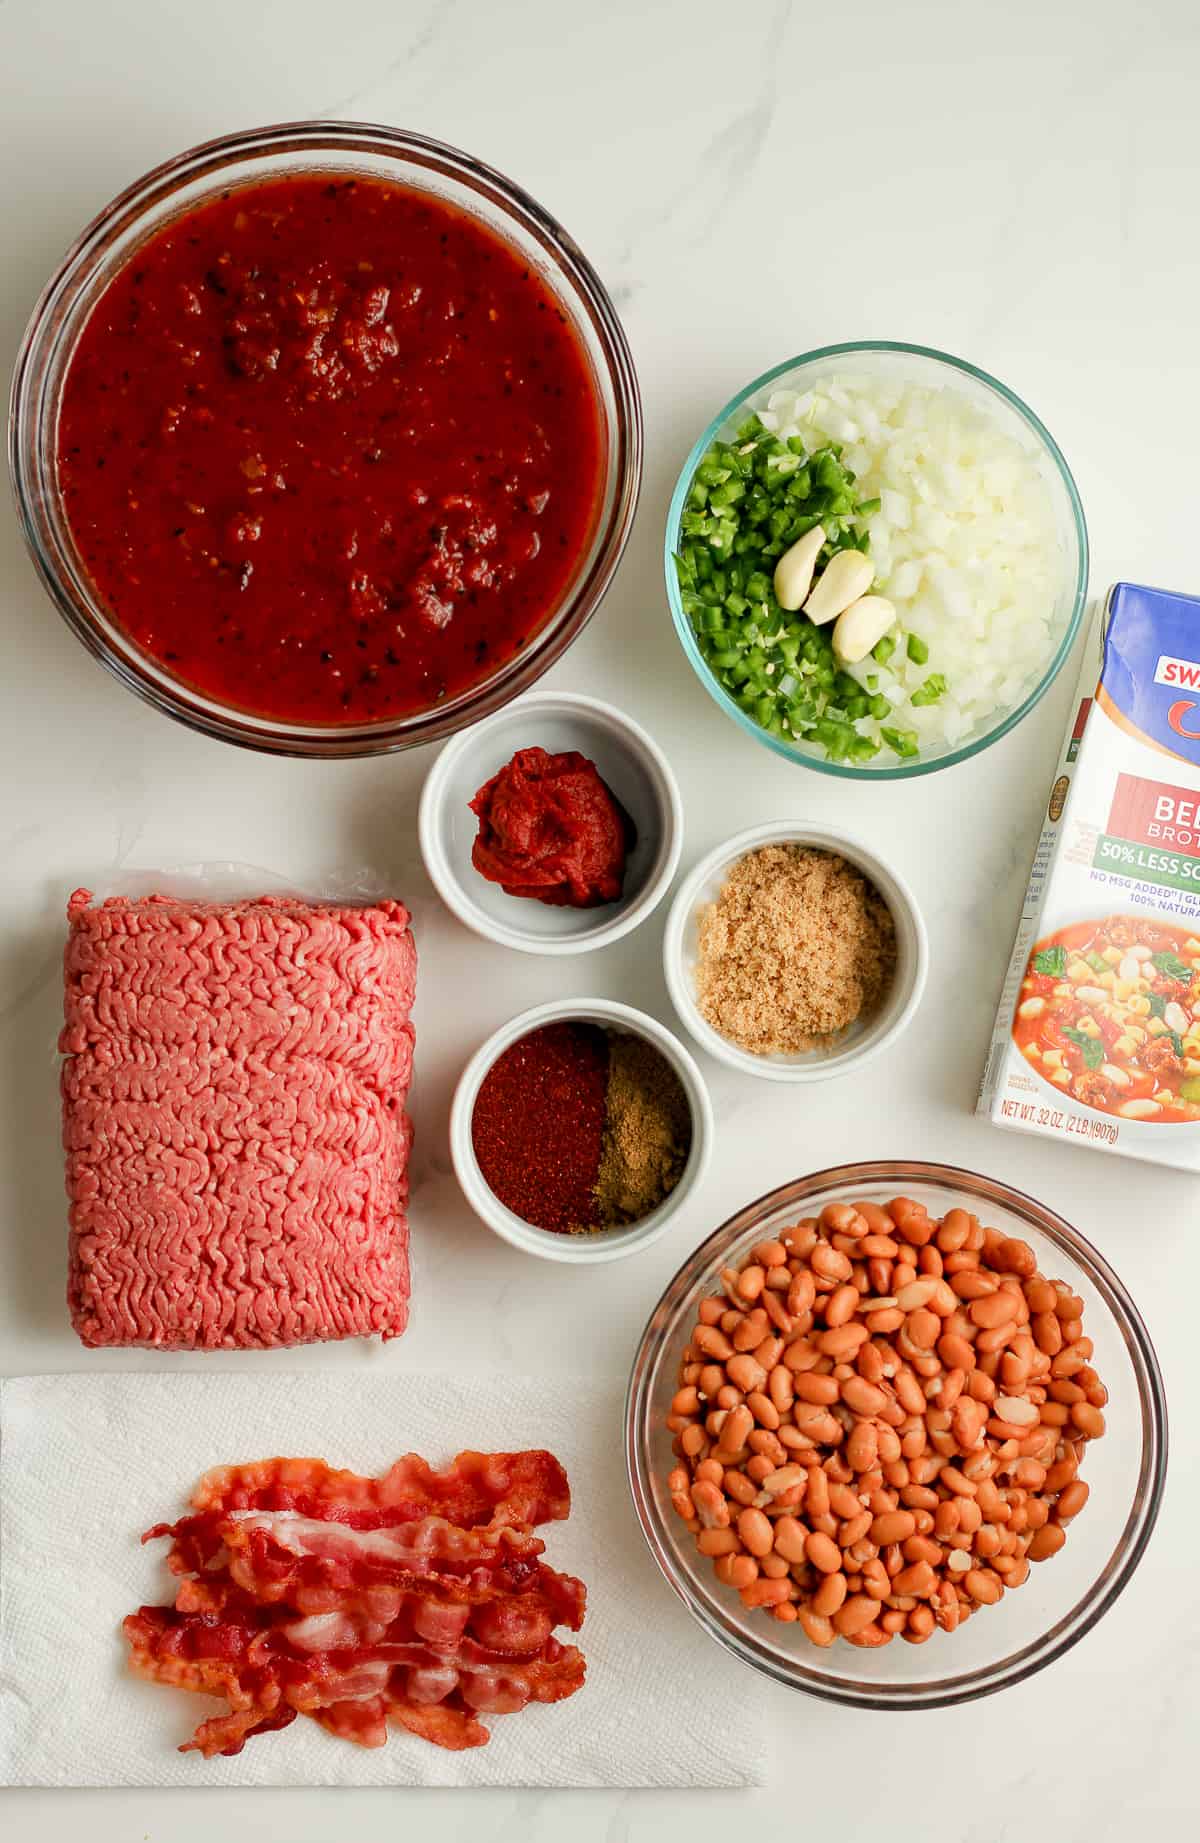 The ingredients used for beef chili.